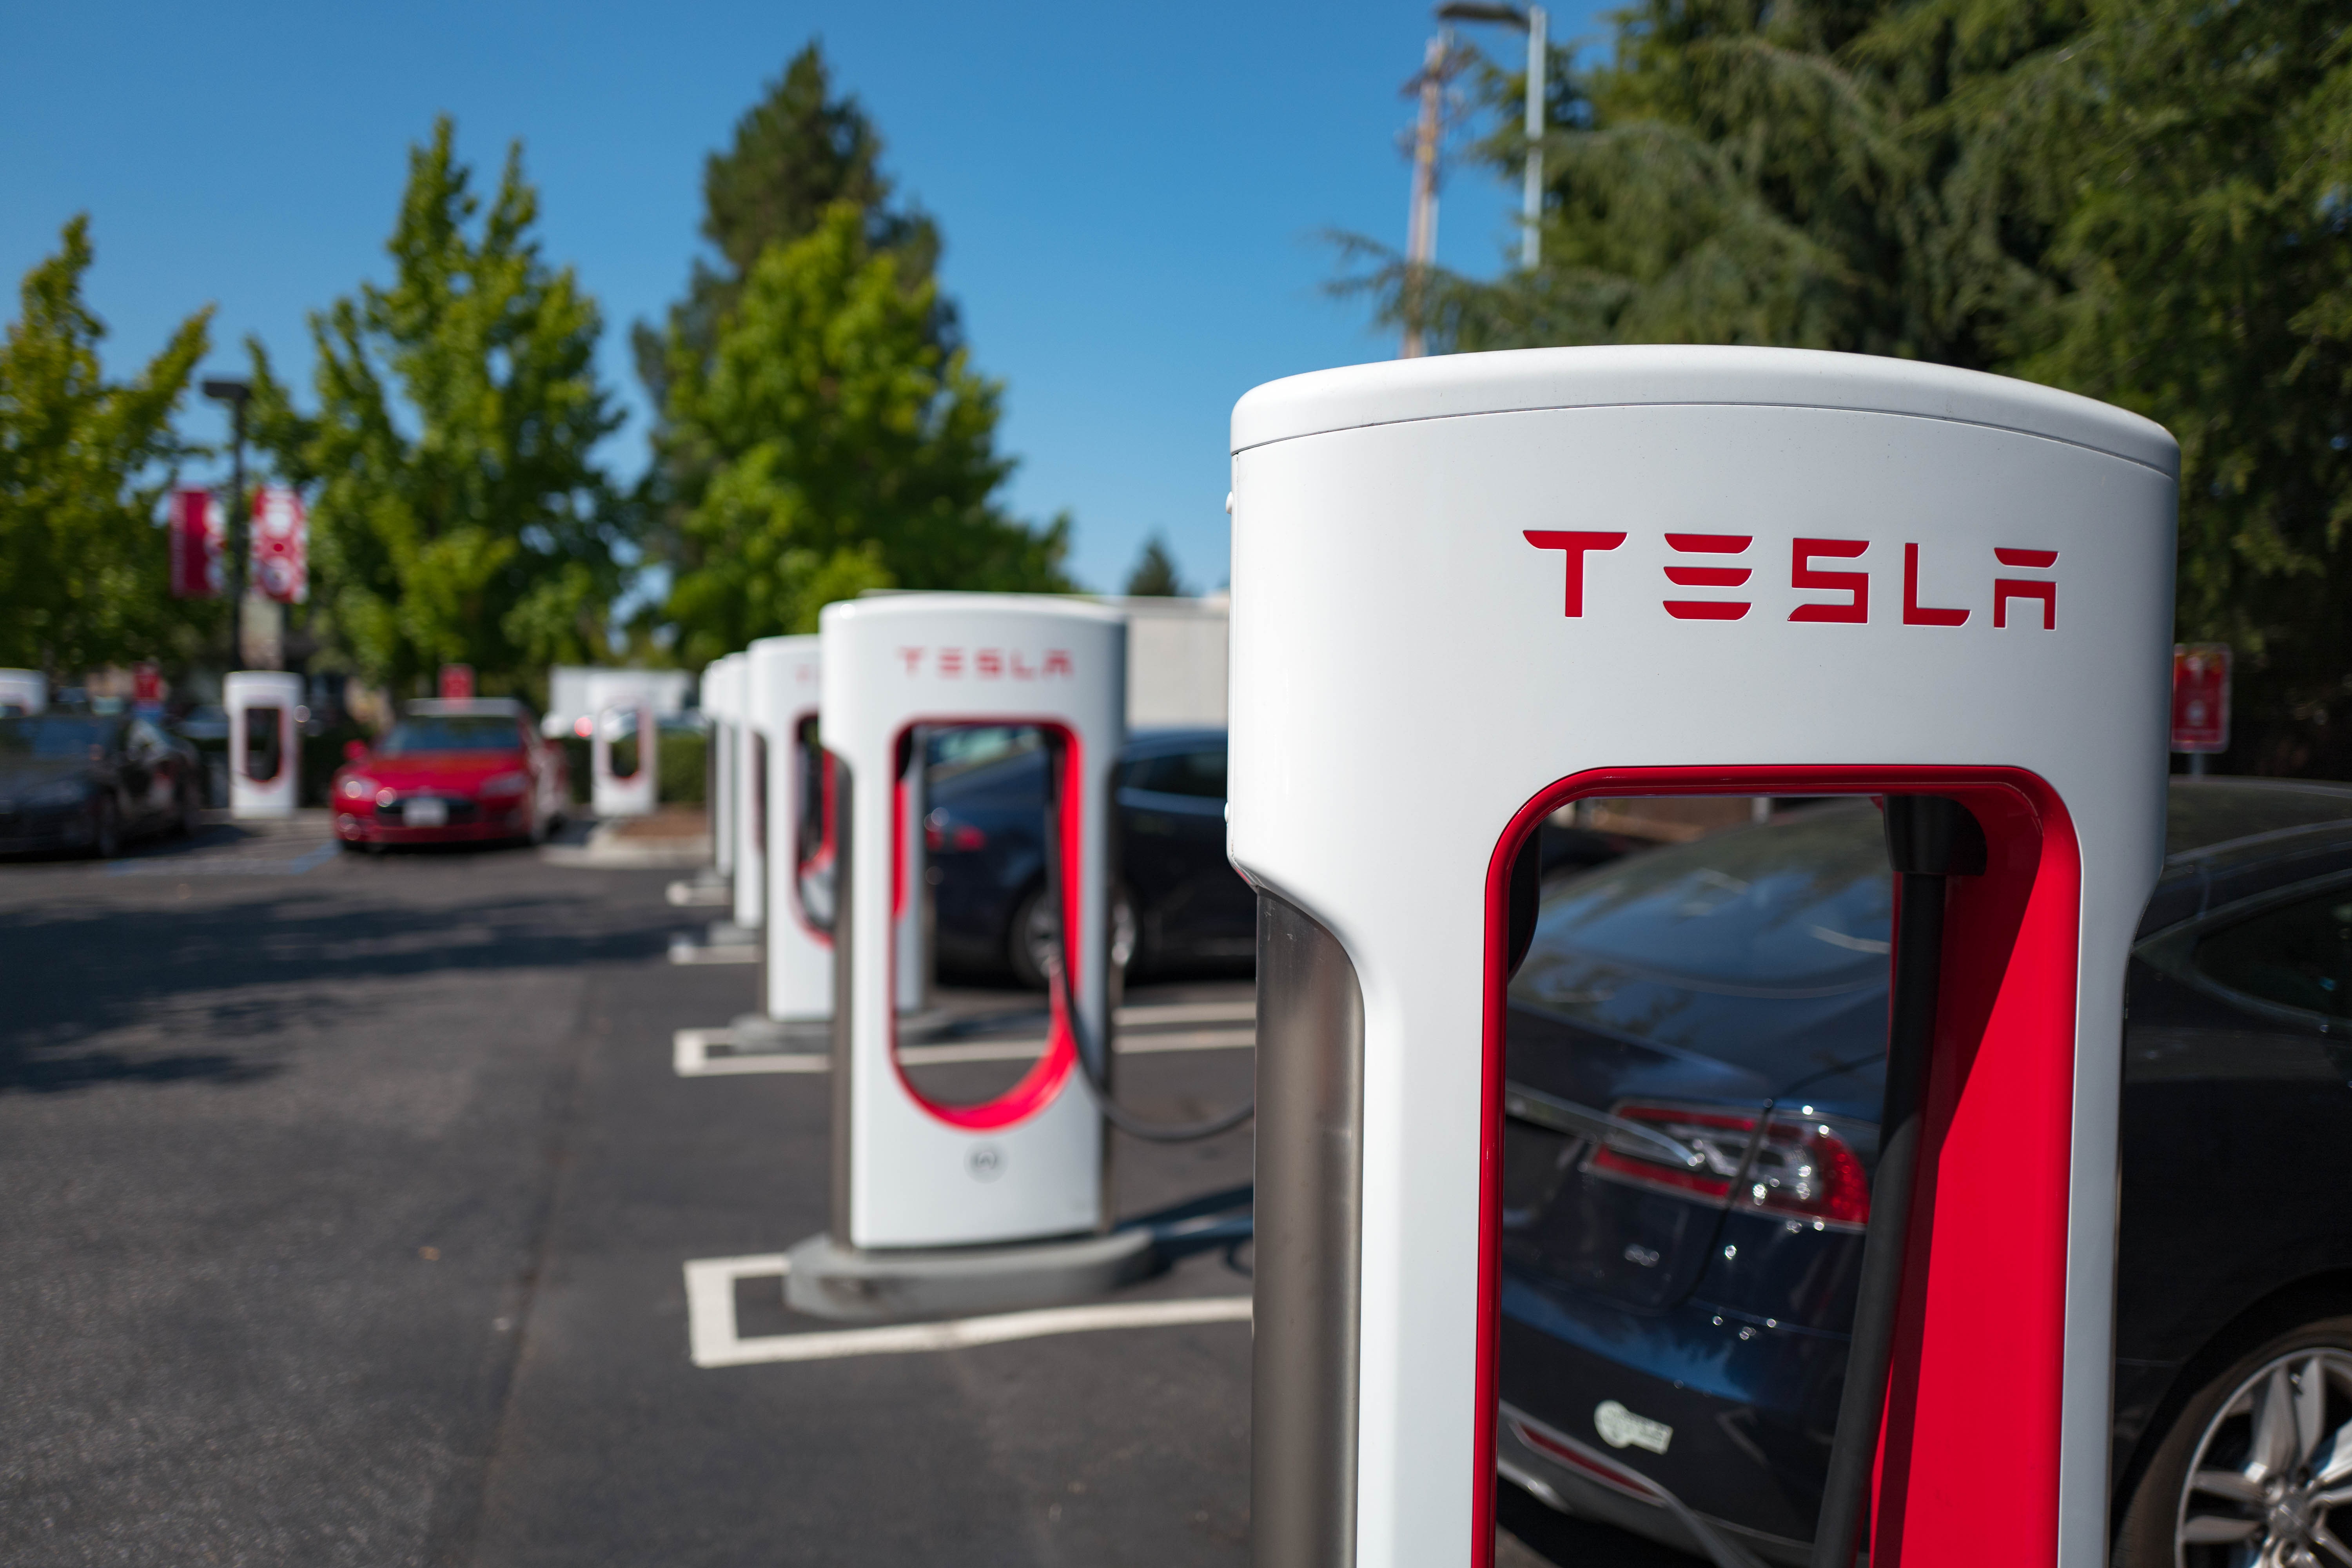 Tesla Investors and Analysts Jump Ship: It’s a “Quagmire” Says One